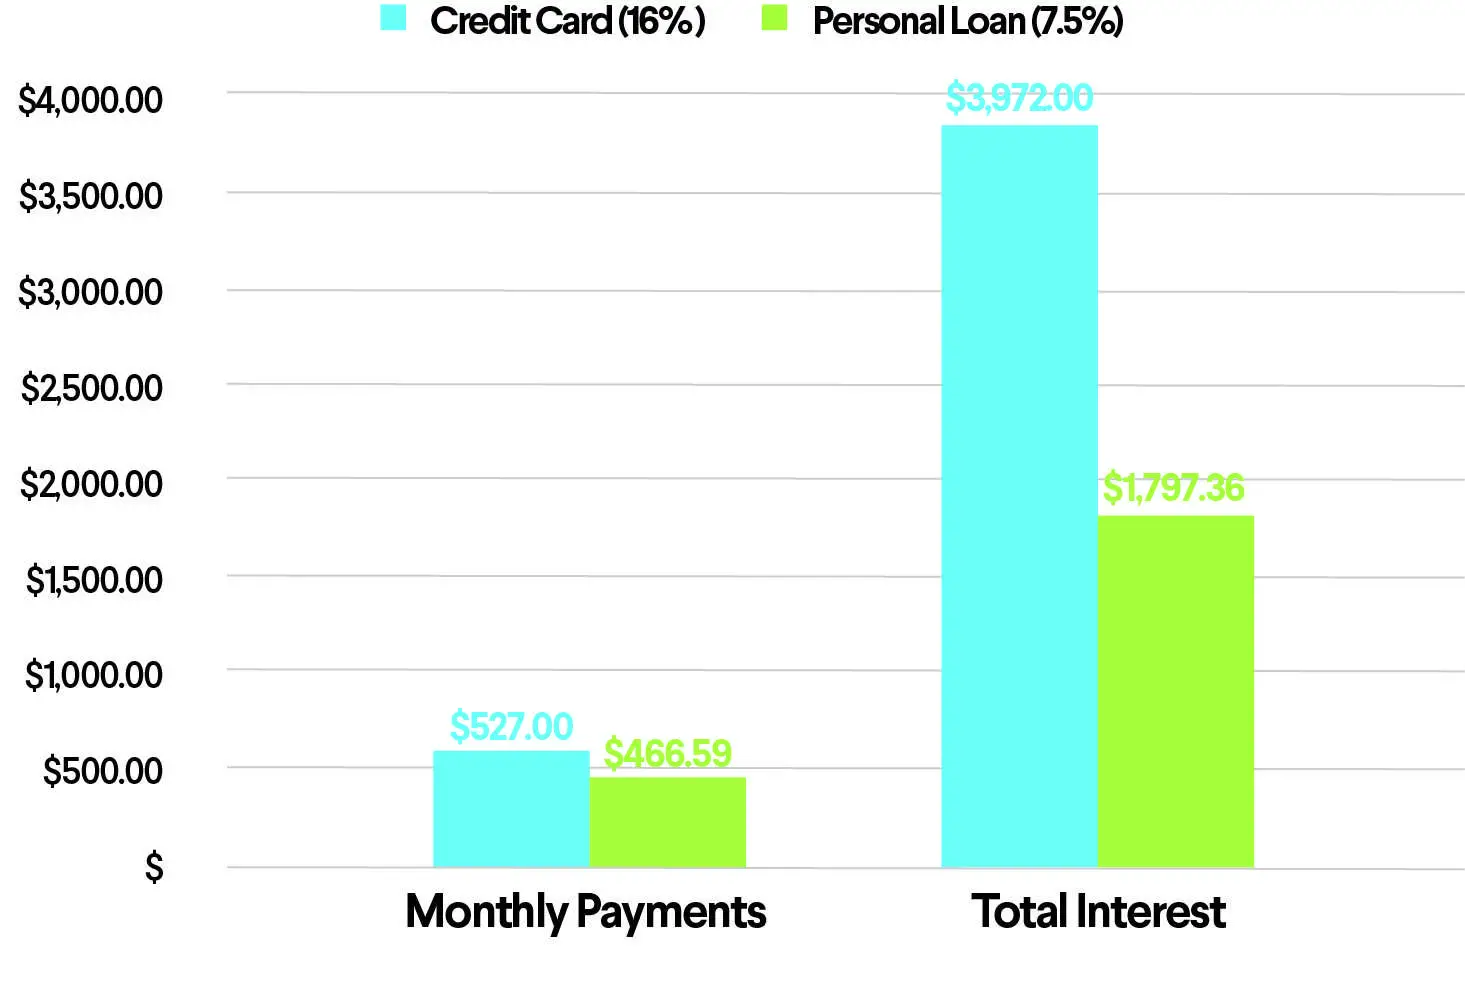 How to Pay Off Credit Card Debt with a Personal Loan